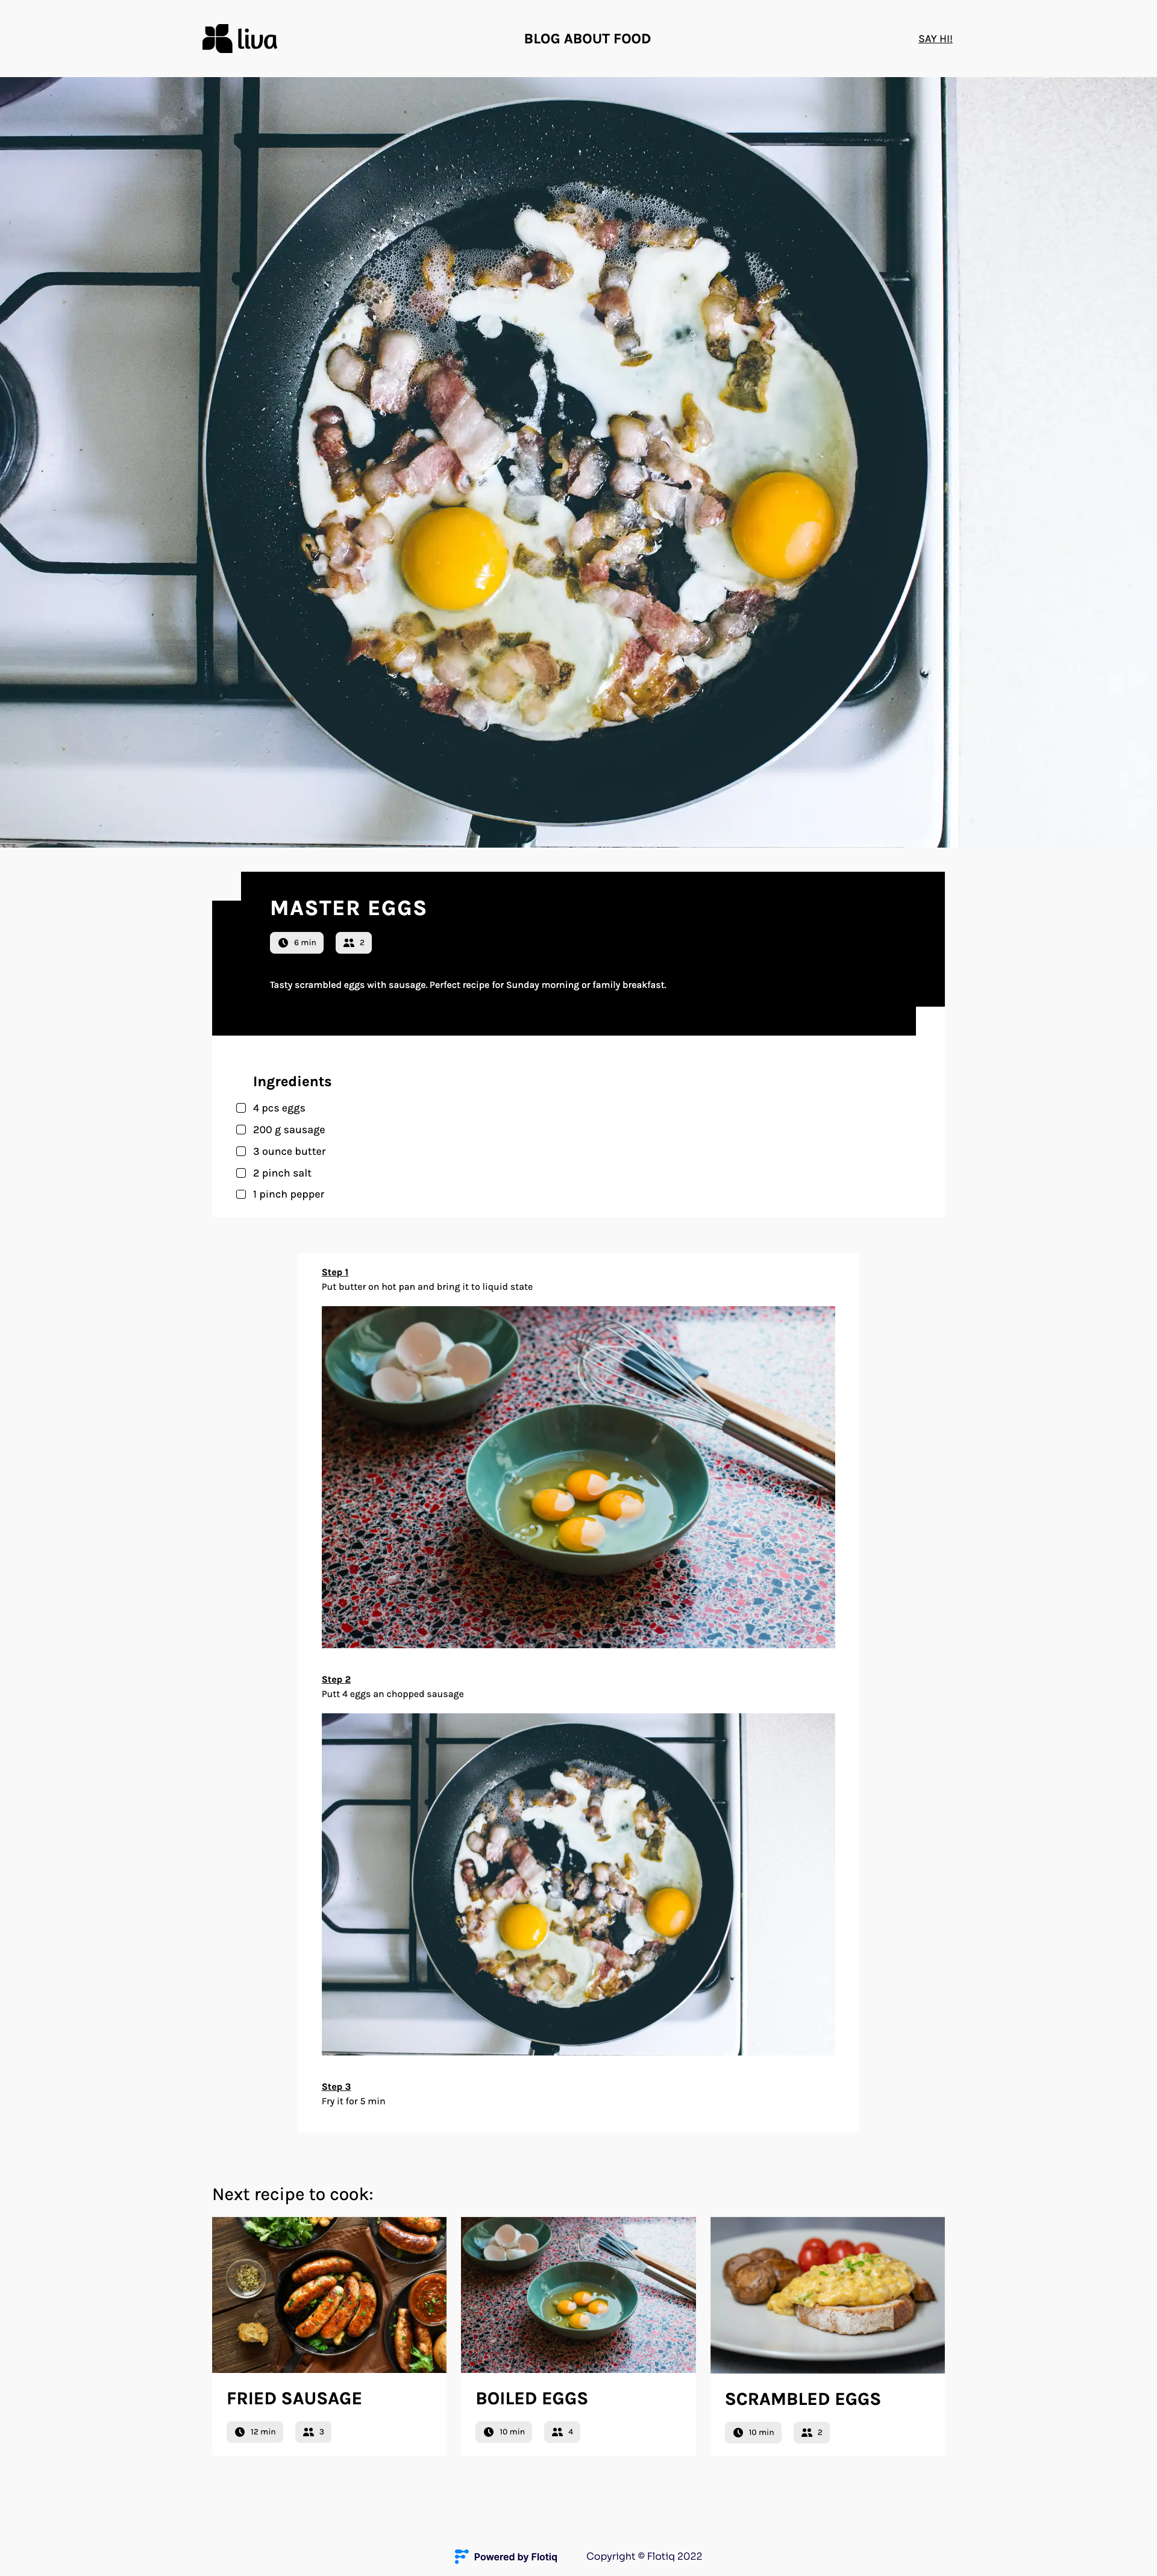 This is how frontend of our recipe page looks like